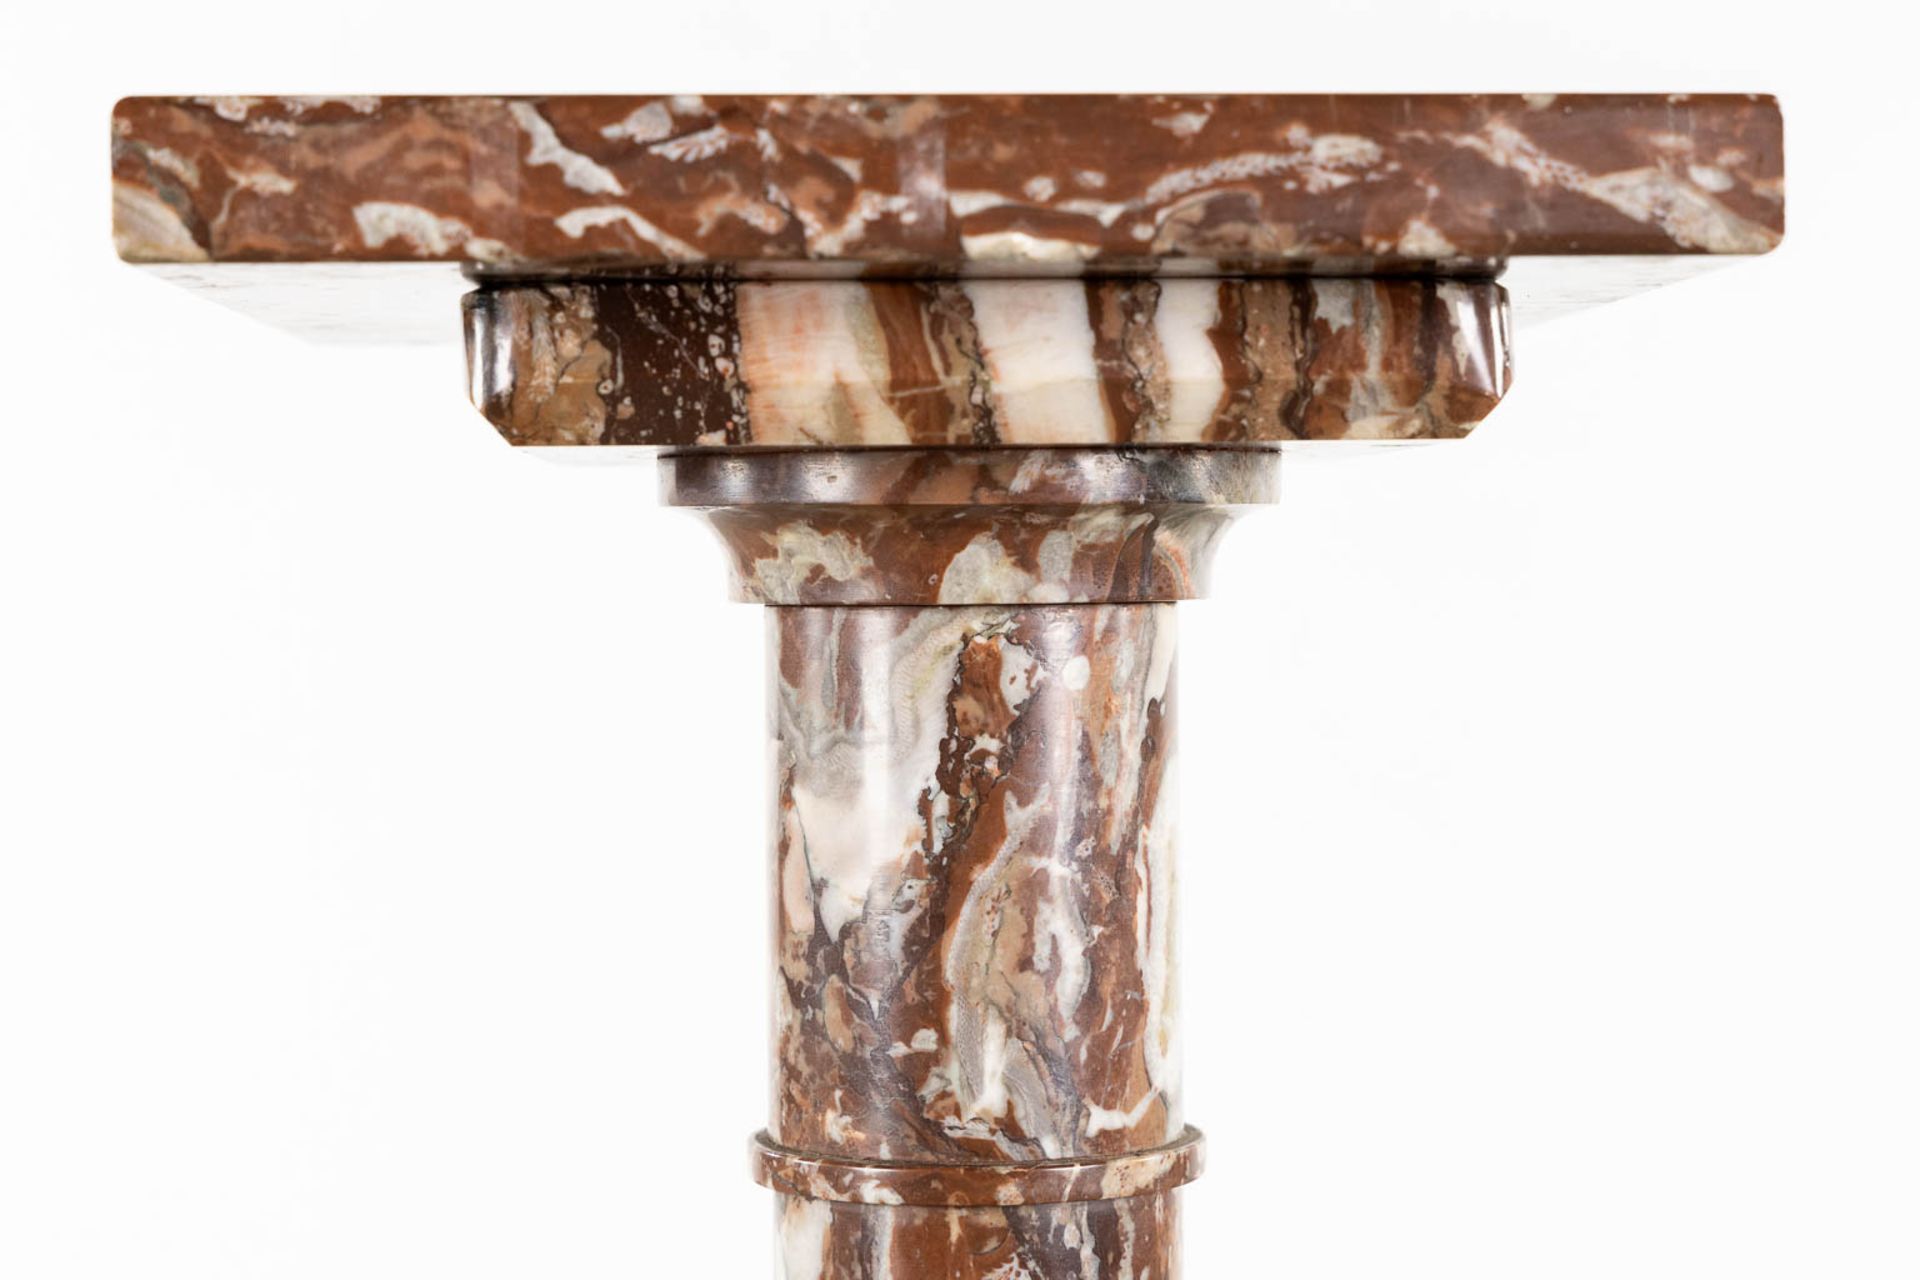 An elegant red marble pedestal with a revolving top. Circa 1900. (L:23 x W:23 x H:101 cm) - Image 10 of 11